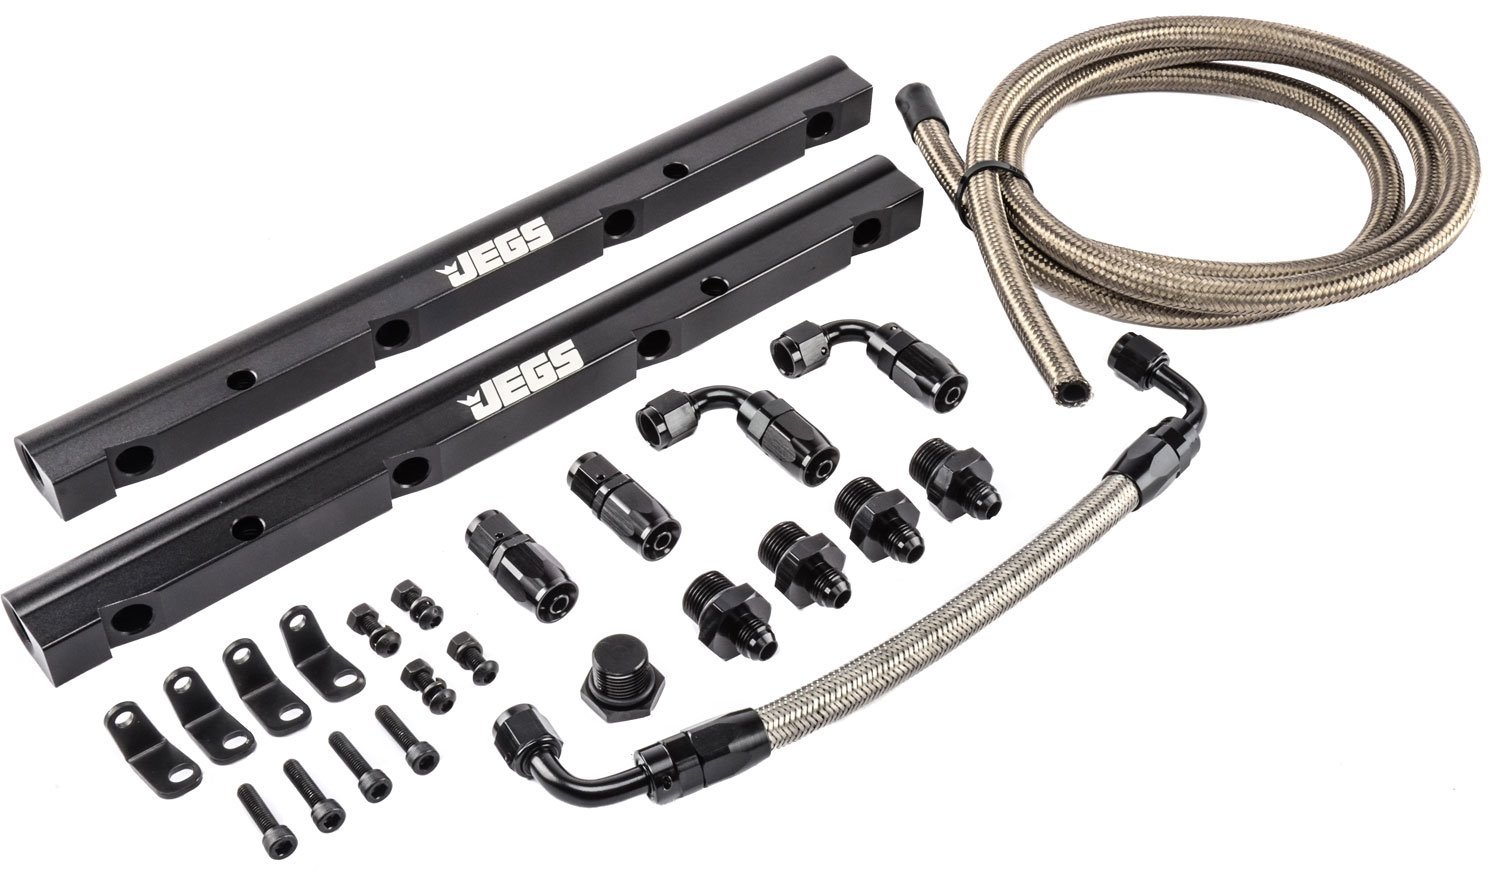 EFI Fuel Rail Kit for LS1 and LS6 Factory Intakes